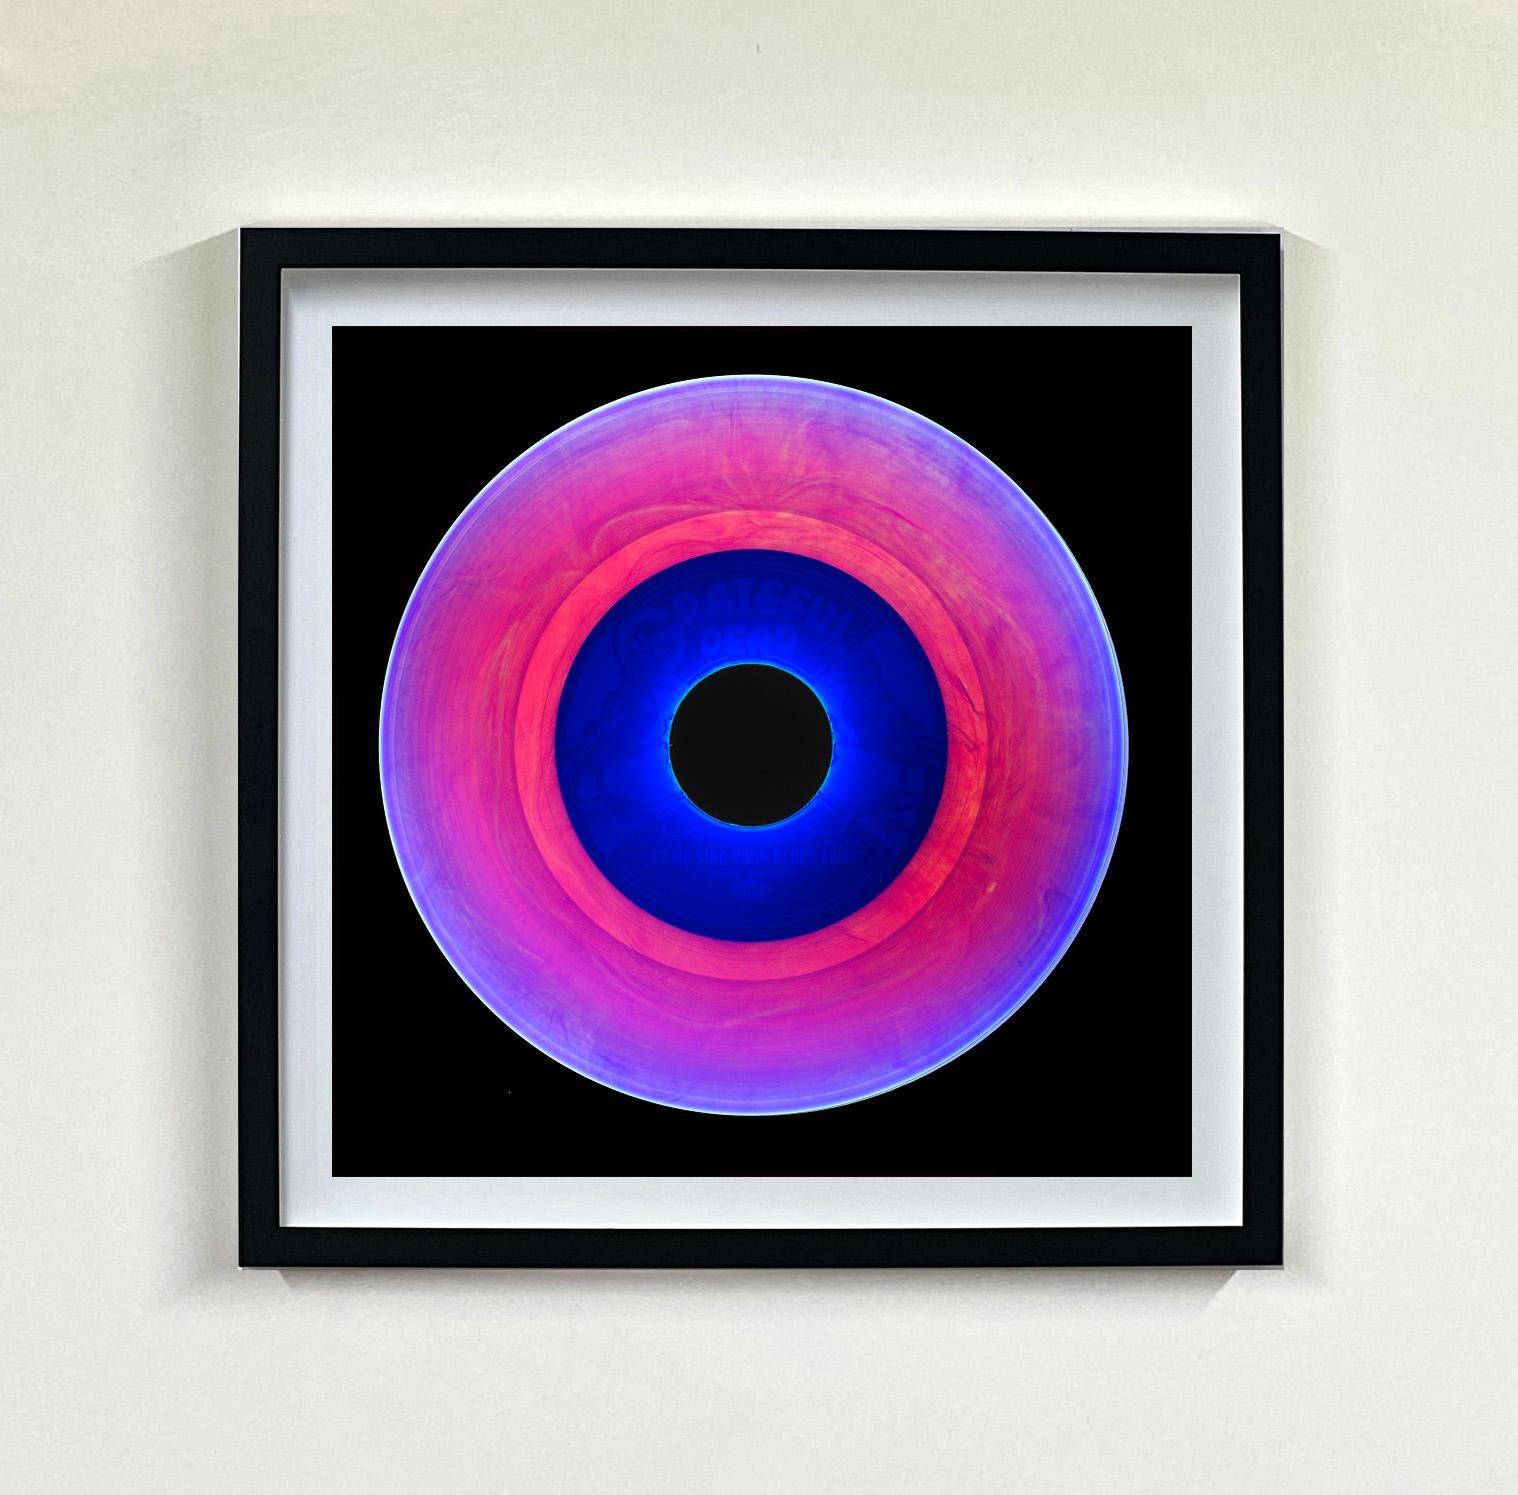 Heidler & Heeps Vinyl Collection Twenty-Five Piece Multi-color Square Installation.
Acclaimed contemporary photographers, Richard Heeps and Natasha Heidler have collaborated to make this beautifully mesmerising collection. A celebration of the vinyl